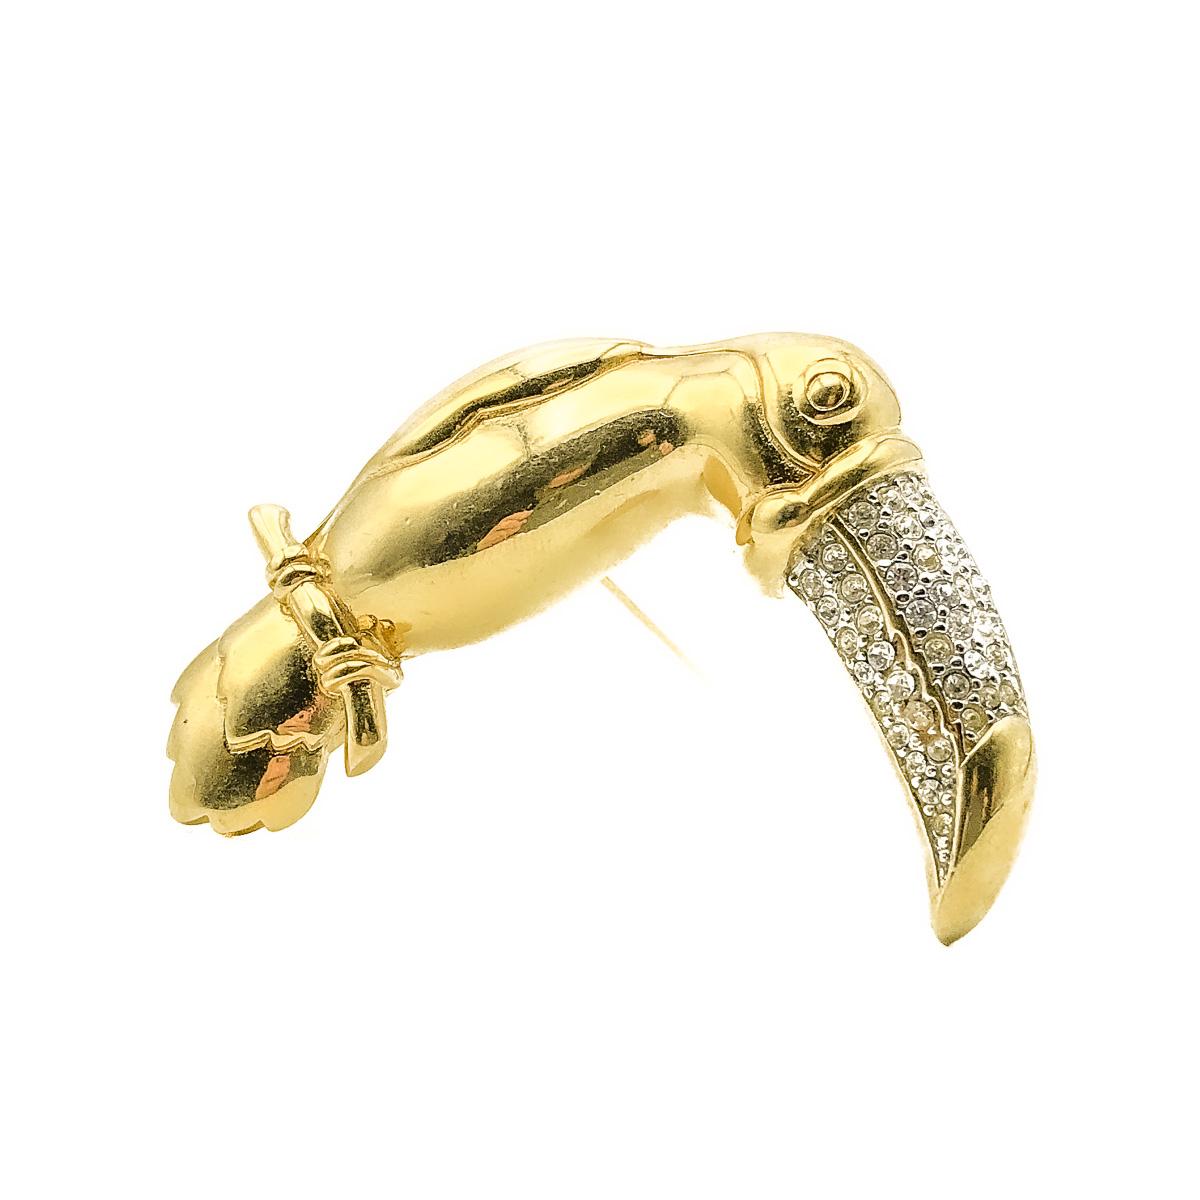 A striking Vintage Givenchy Toucan Brooch. Crafted in weighty gold plated metal and set with crystals. In very good vintage condition. Signed. Approx.  6cms. A fabulous figural pin that is certain to attract admiring glances every wear.